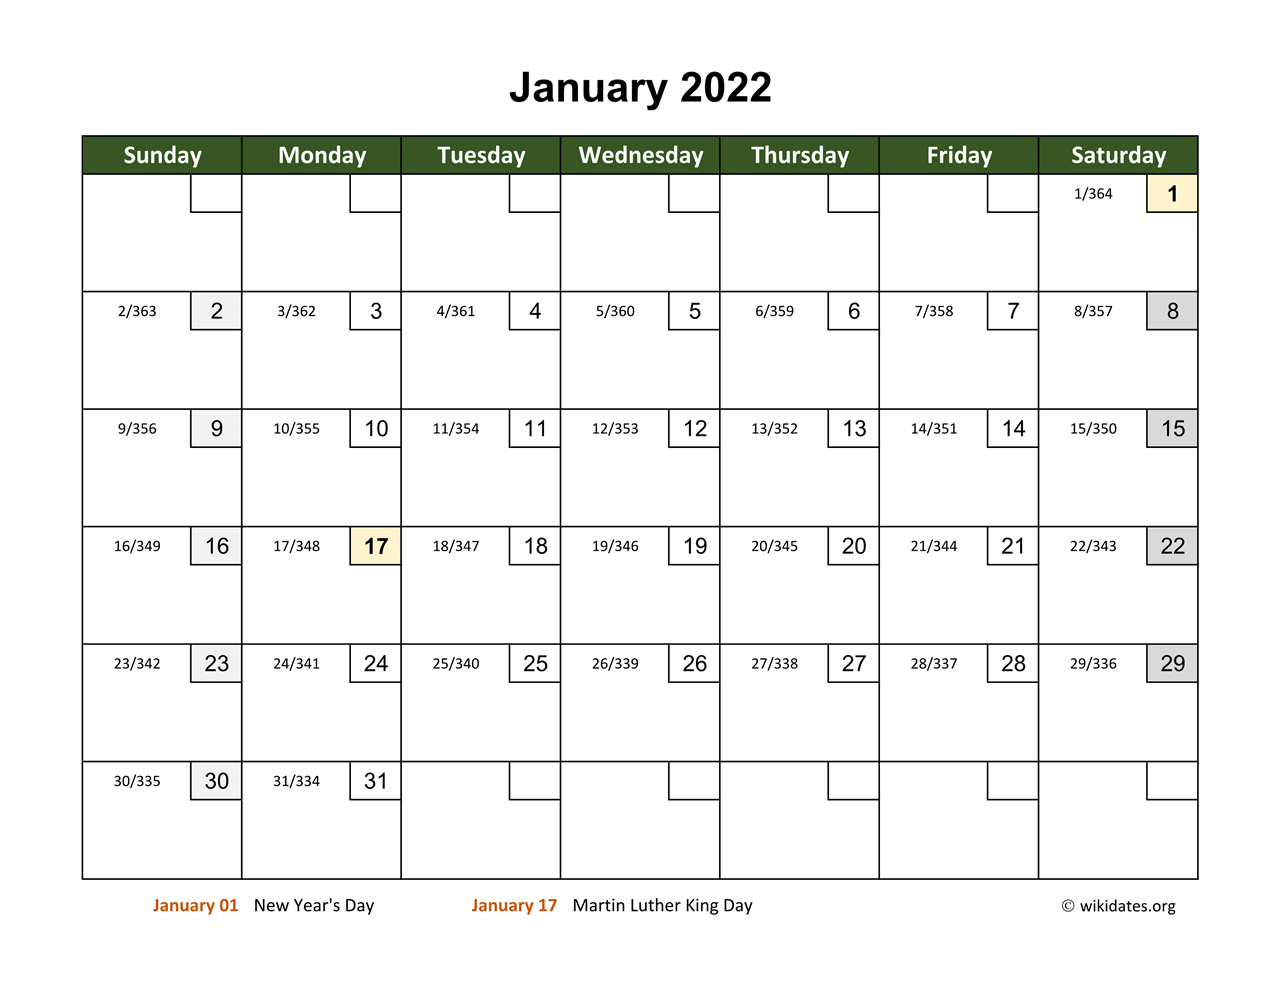 Special Days Calendar 2022 Monthly 2022 Calendar With Day Numbers | Wikidates.org